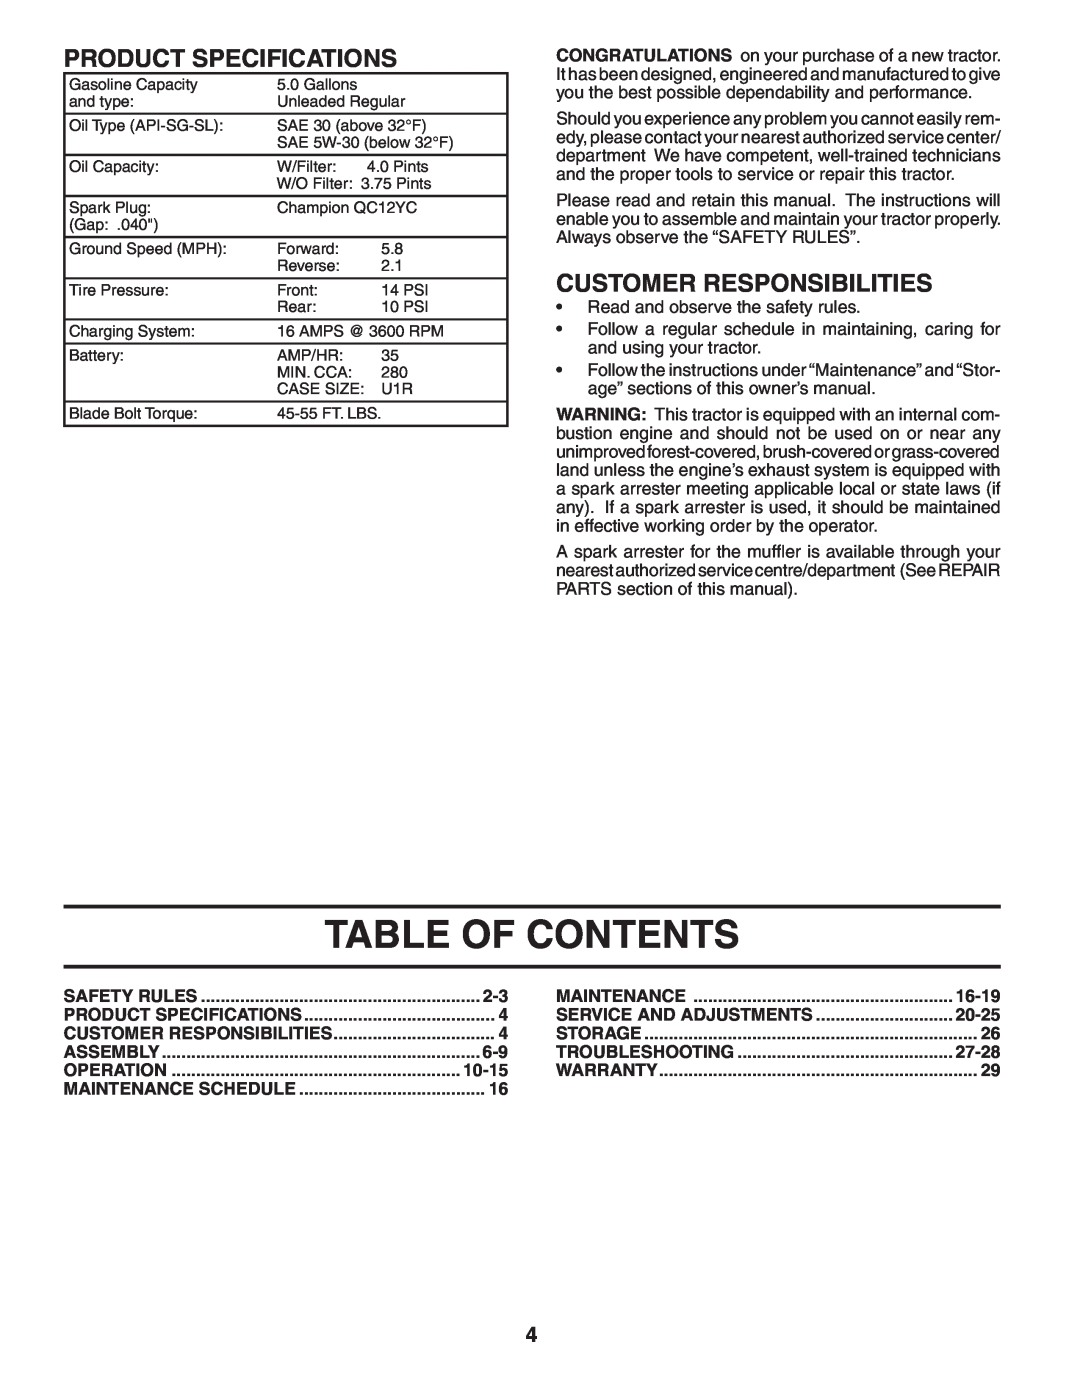 Poulan PBGT27H54 manual Table Of Contents, Product Specifications, Customer Responsibilities, 10-15, 16-19, 20-25, 27-28 